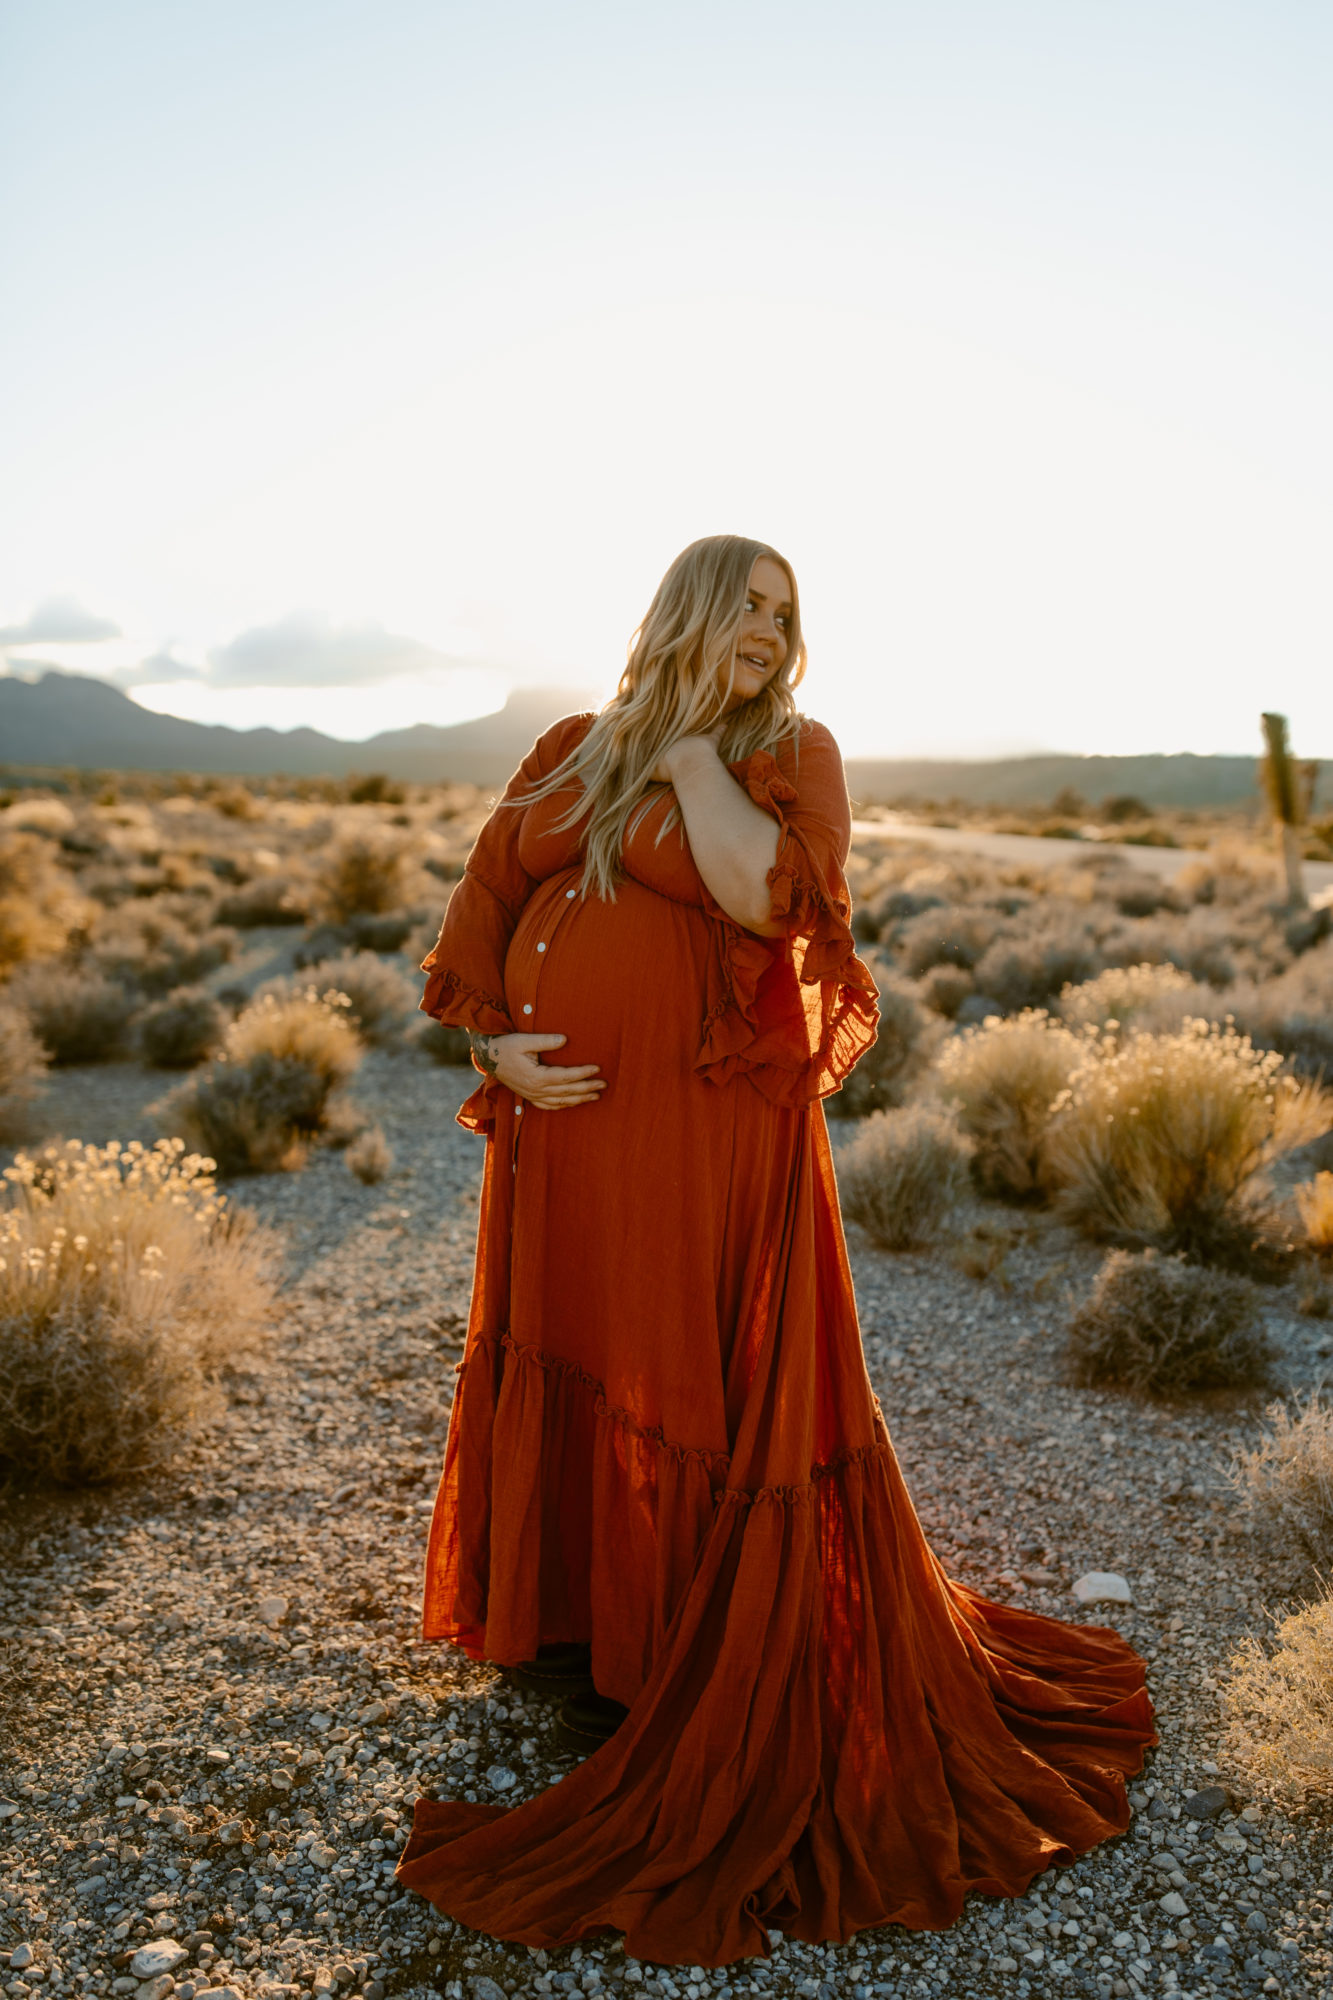 Woman holding pregnant belly during desert photoshoot 